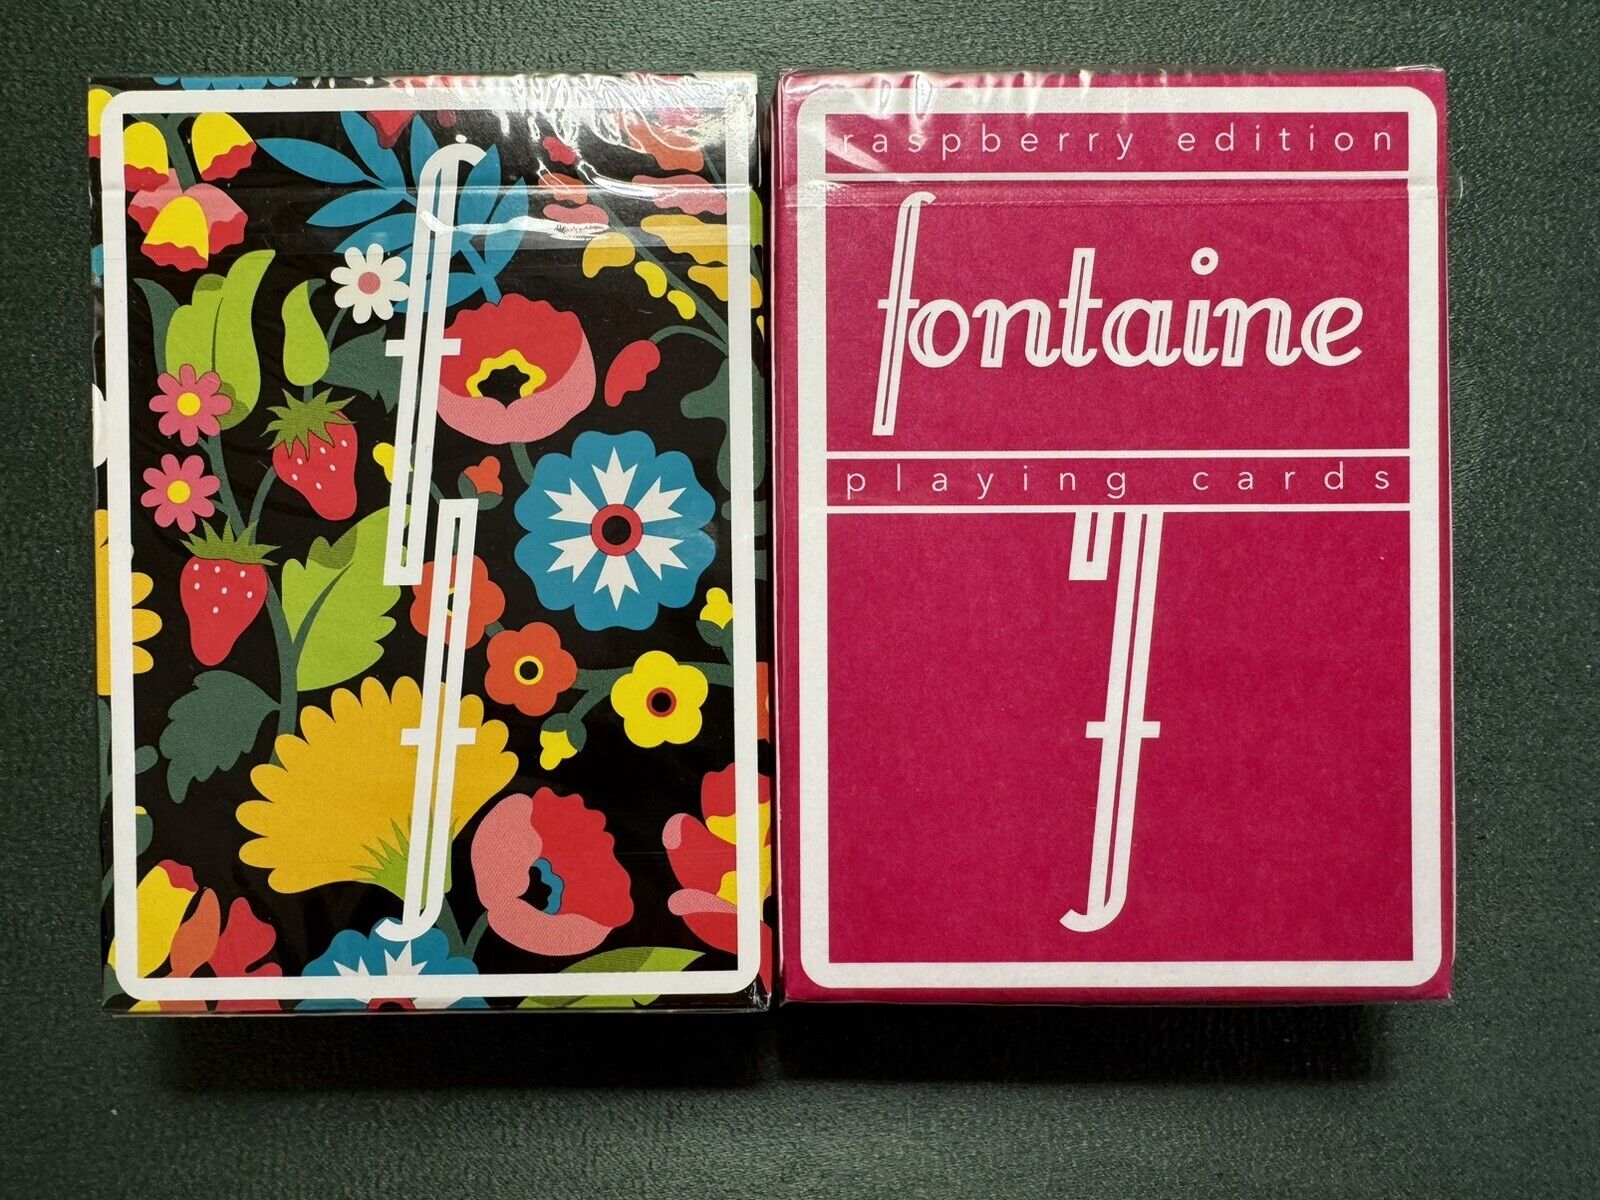 2 Decks Of Fontaine Playing Cards 1 Dabs Myla Ed. & 1 Raspberry Edition